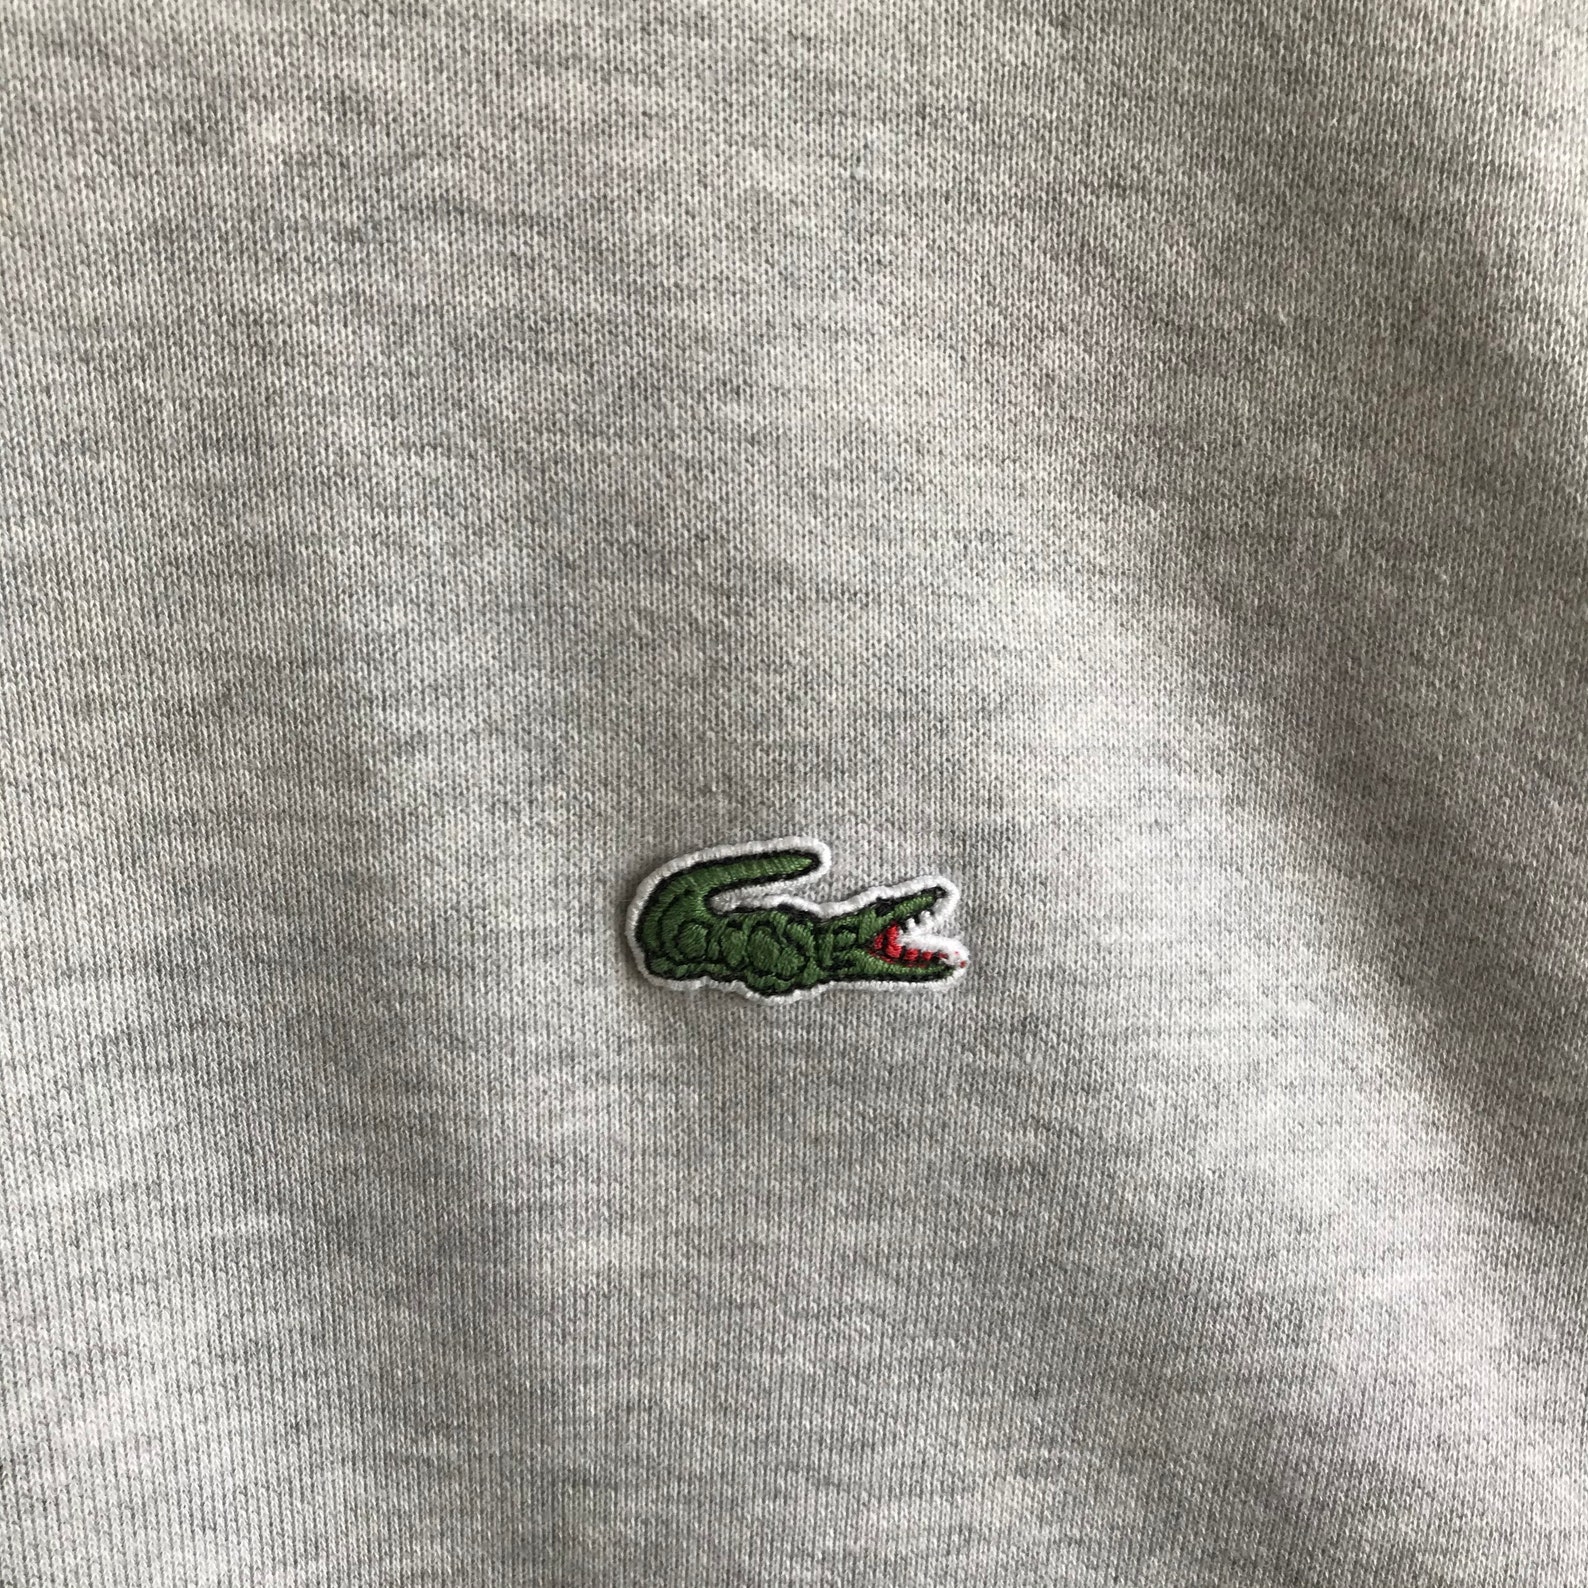 Vintage 90s Lacoste Sport Small Logo Embroidered Lacoste Grey | Etsy